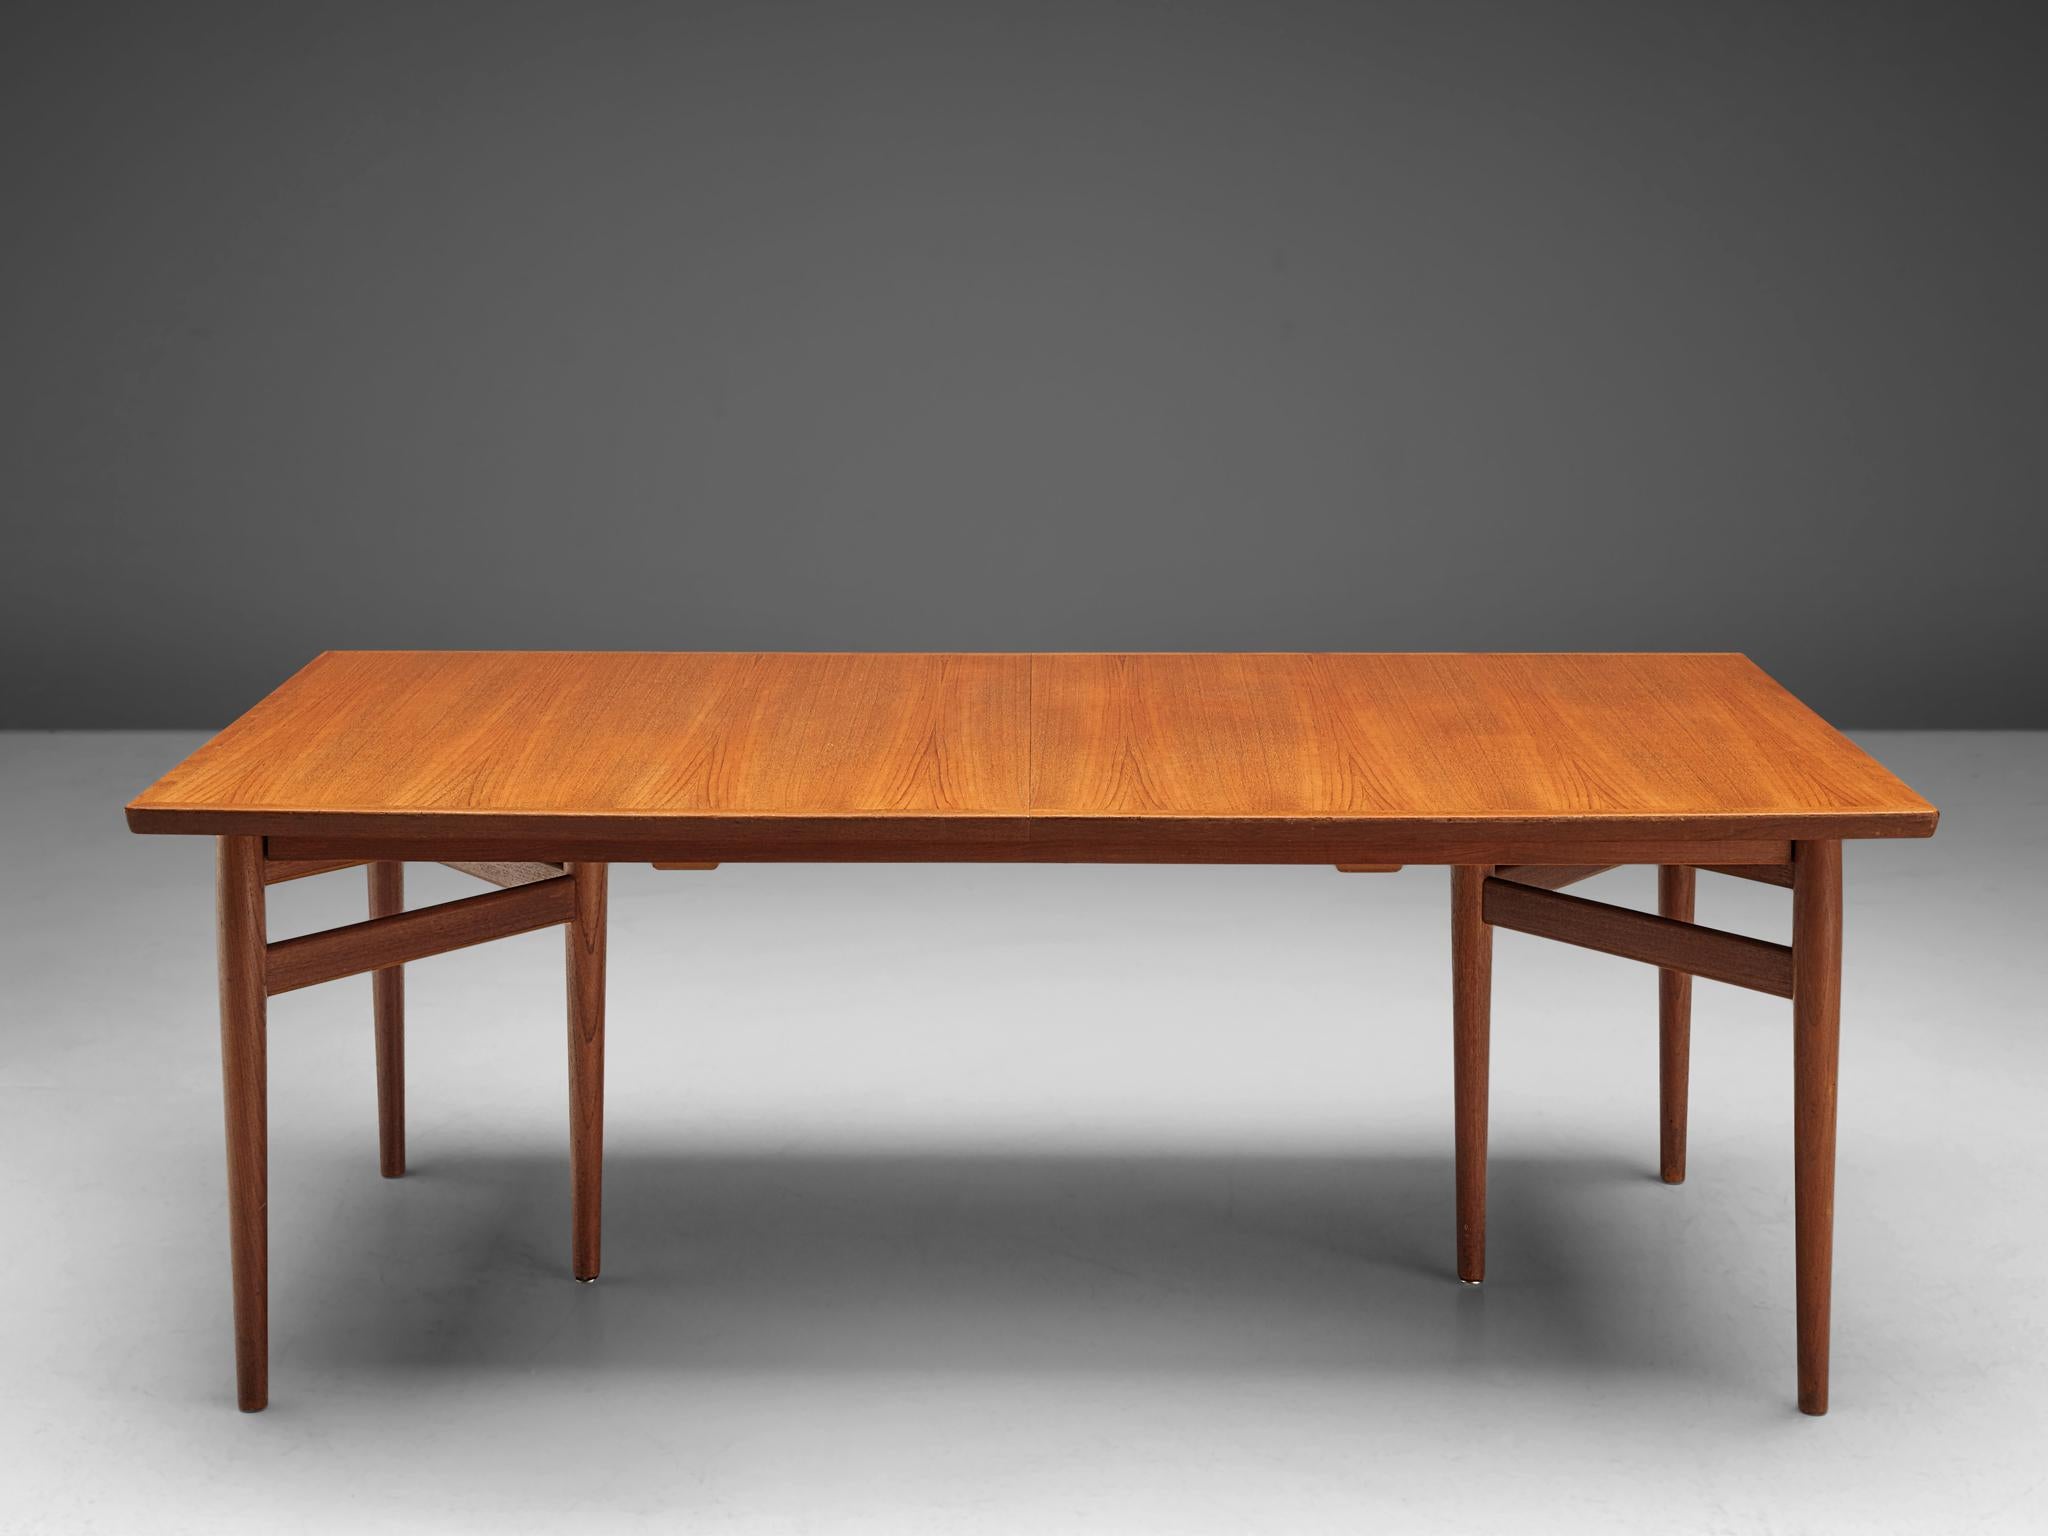 Arne Vodder for Sibast, dining table model 201/8, teak, Denmark, 1960s

This rectangular dining table by Danish designer Arne Vodder was designed and manufactured in the 1960s by Sibast. The convex shaped top is supported by an intriguing base, a